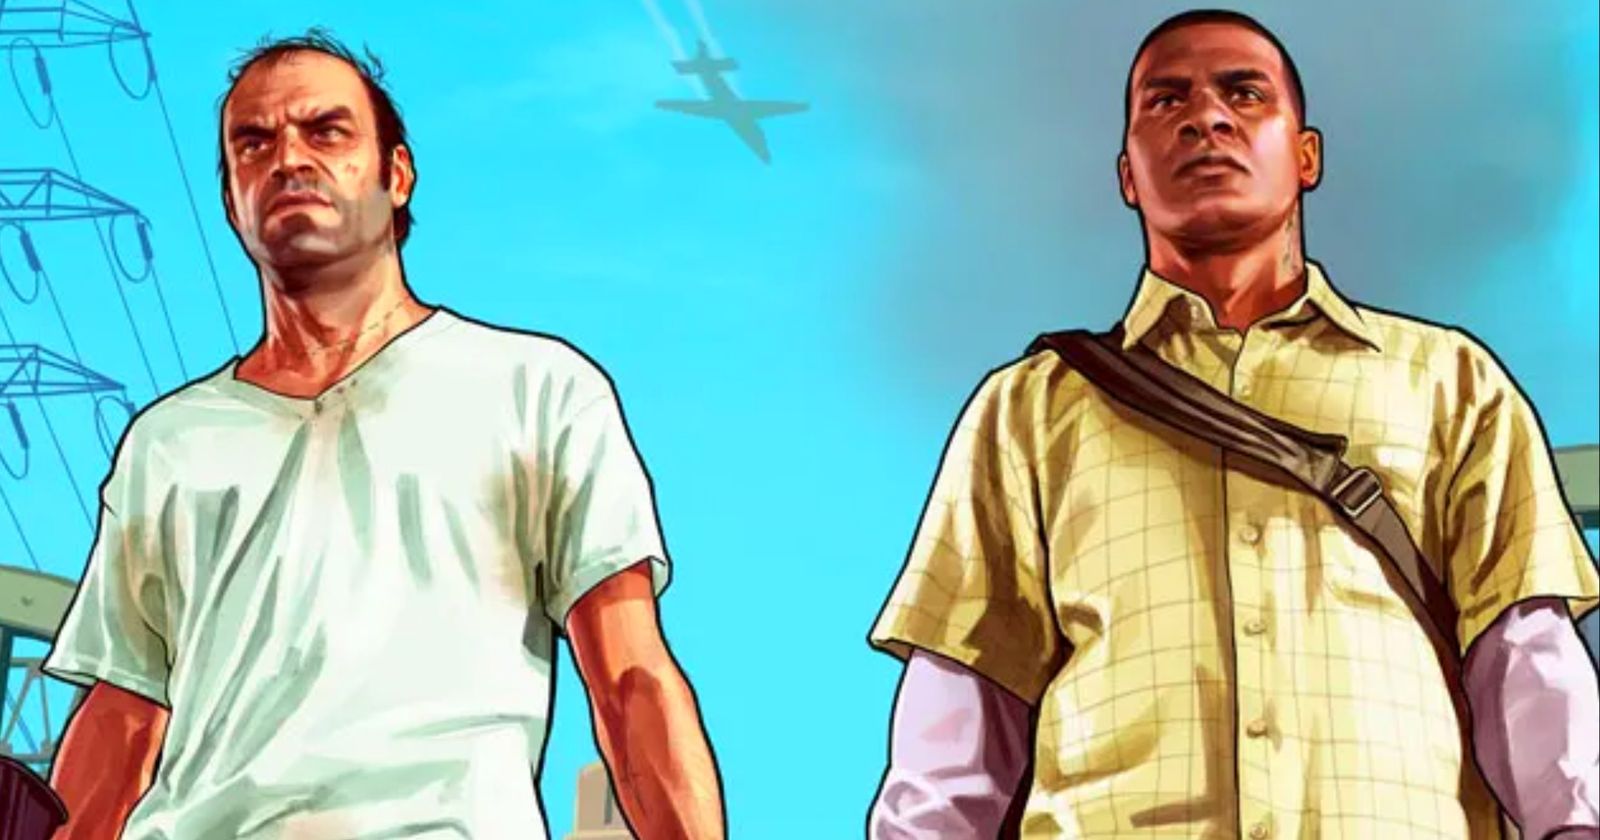 RIP* ROCKSTAR CANCELLED this GAME for GTA 6 (BULLY 2) 